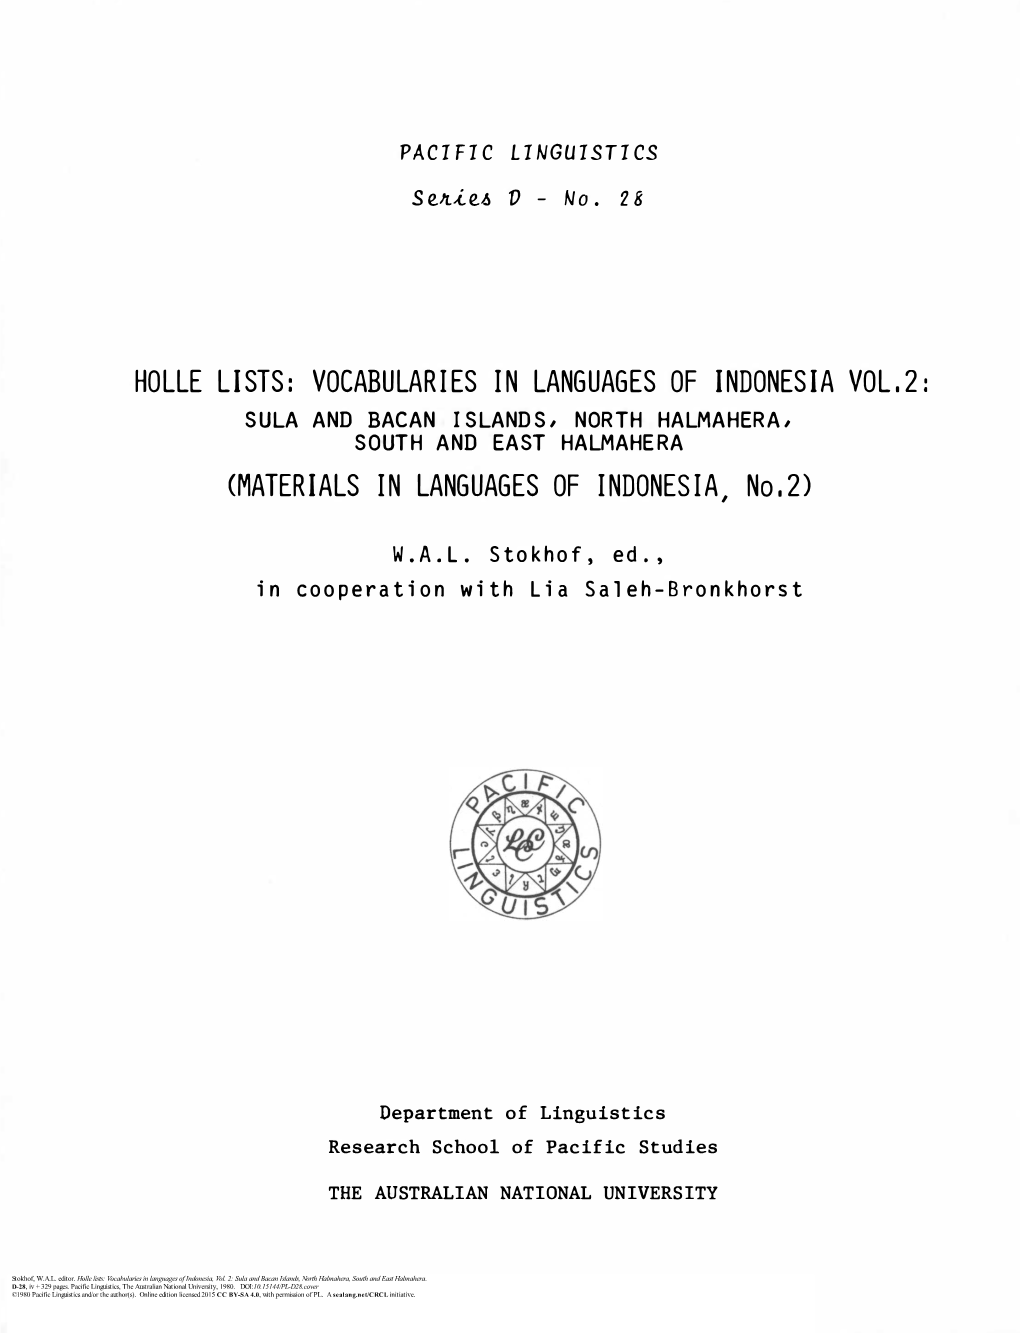 PL-D28.Cover ©1980 Pacific Linguistics And/Or the Author(S)